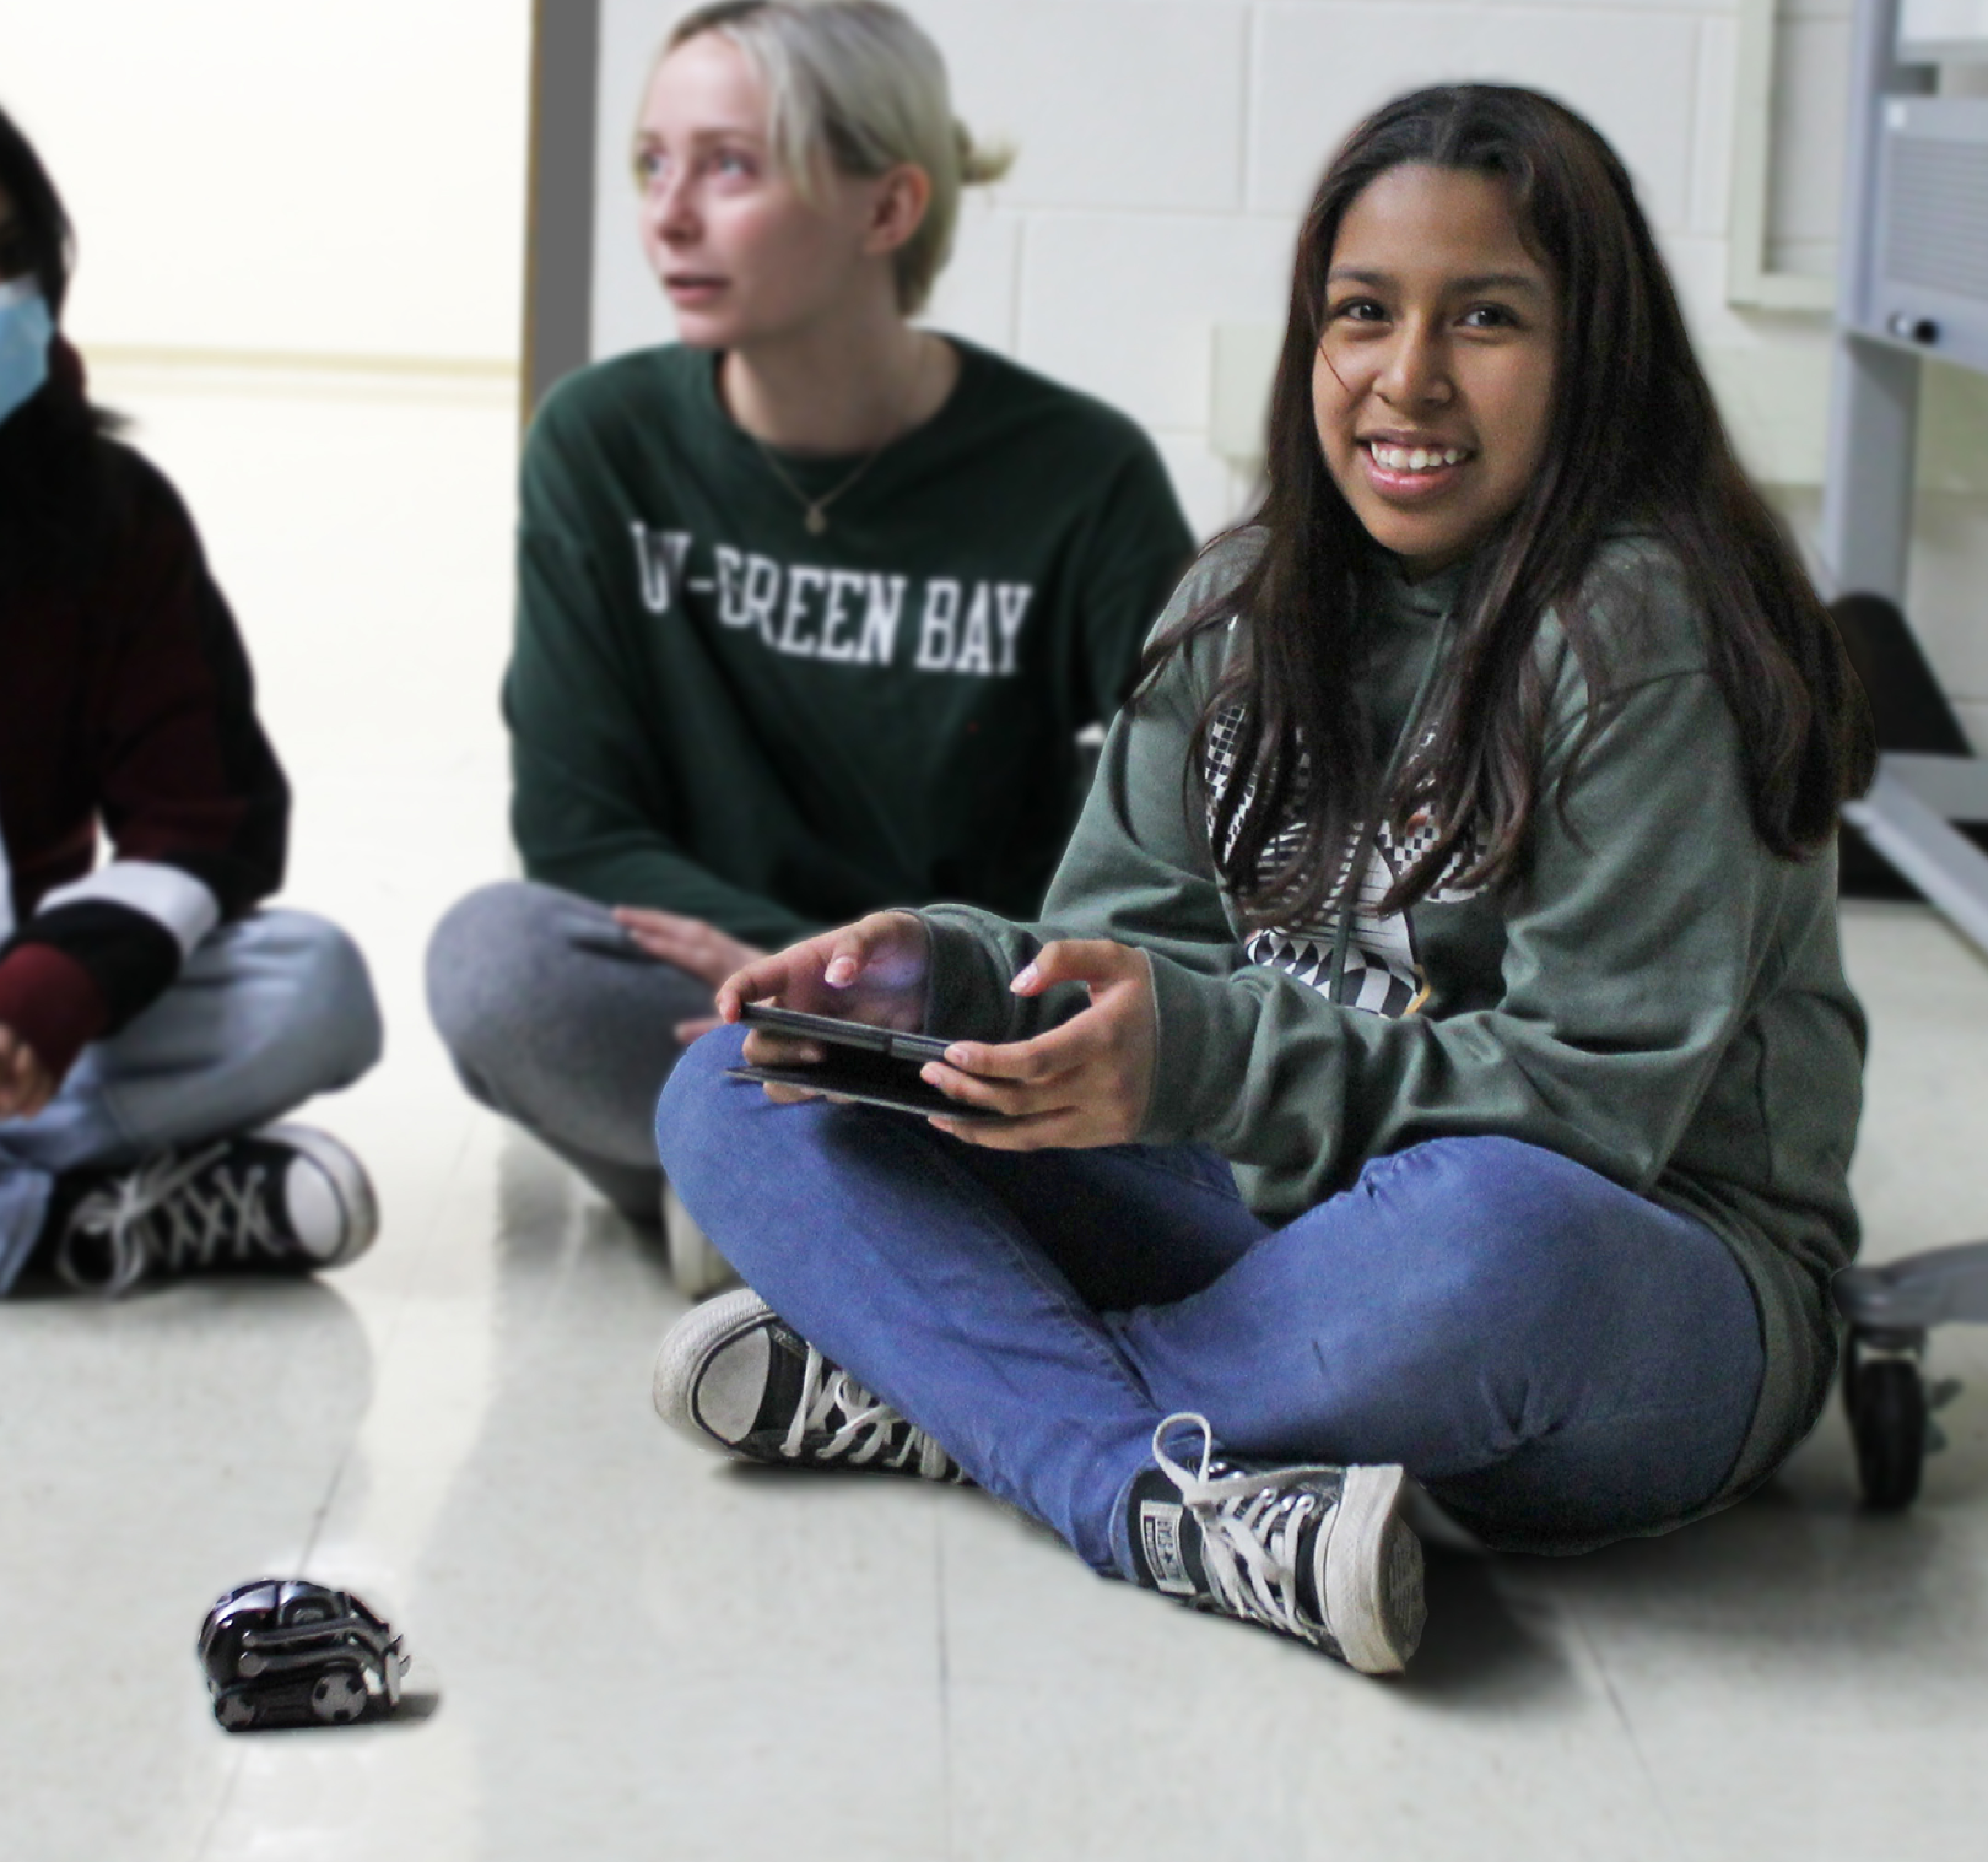 Student engages with robots during UW-Green Bay campus visit